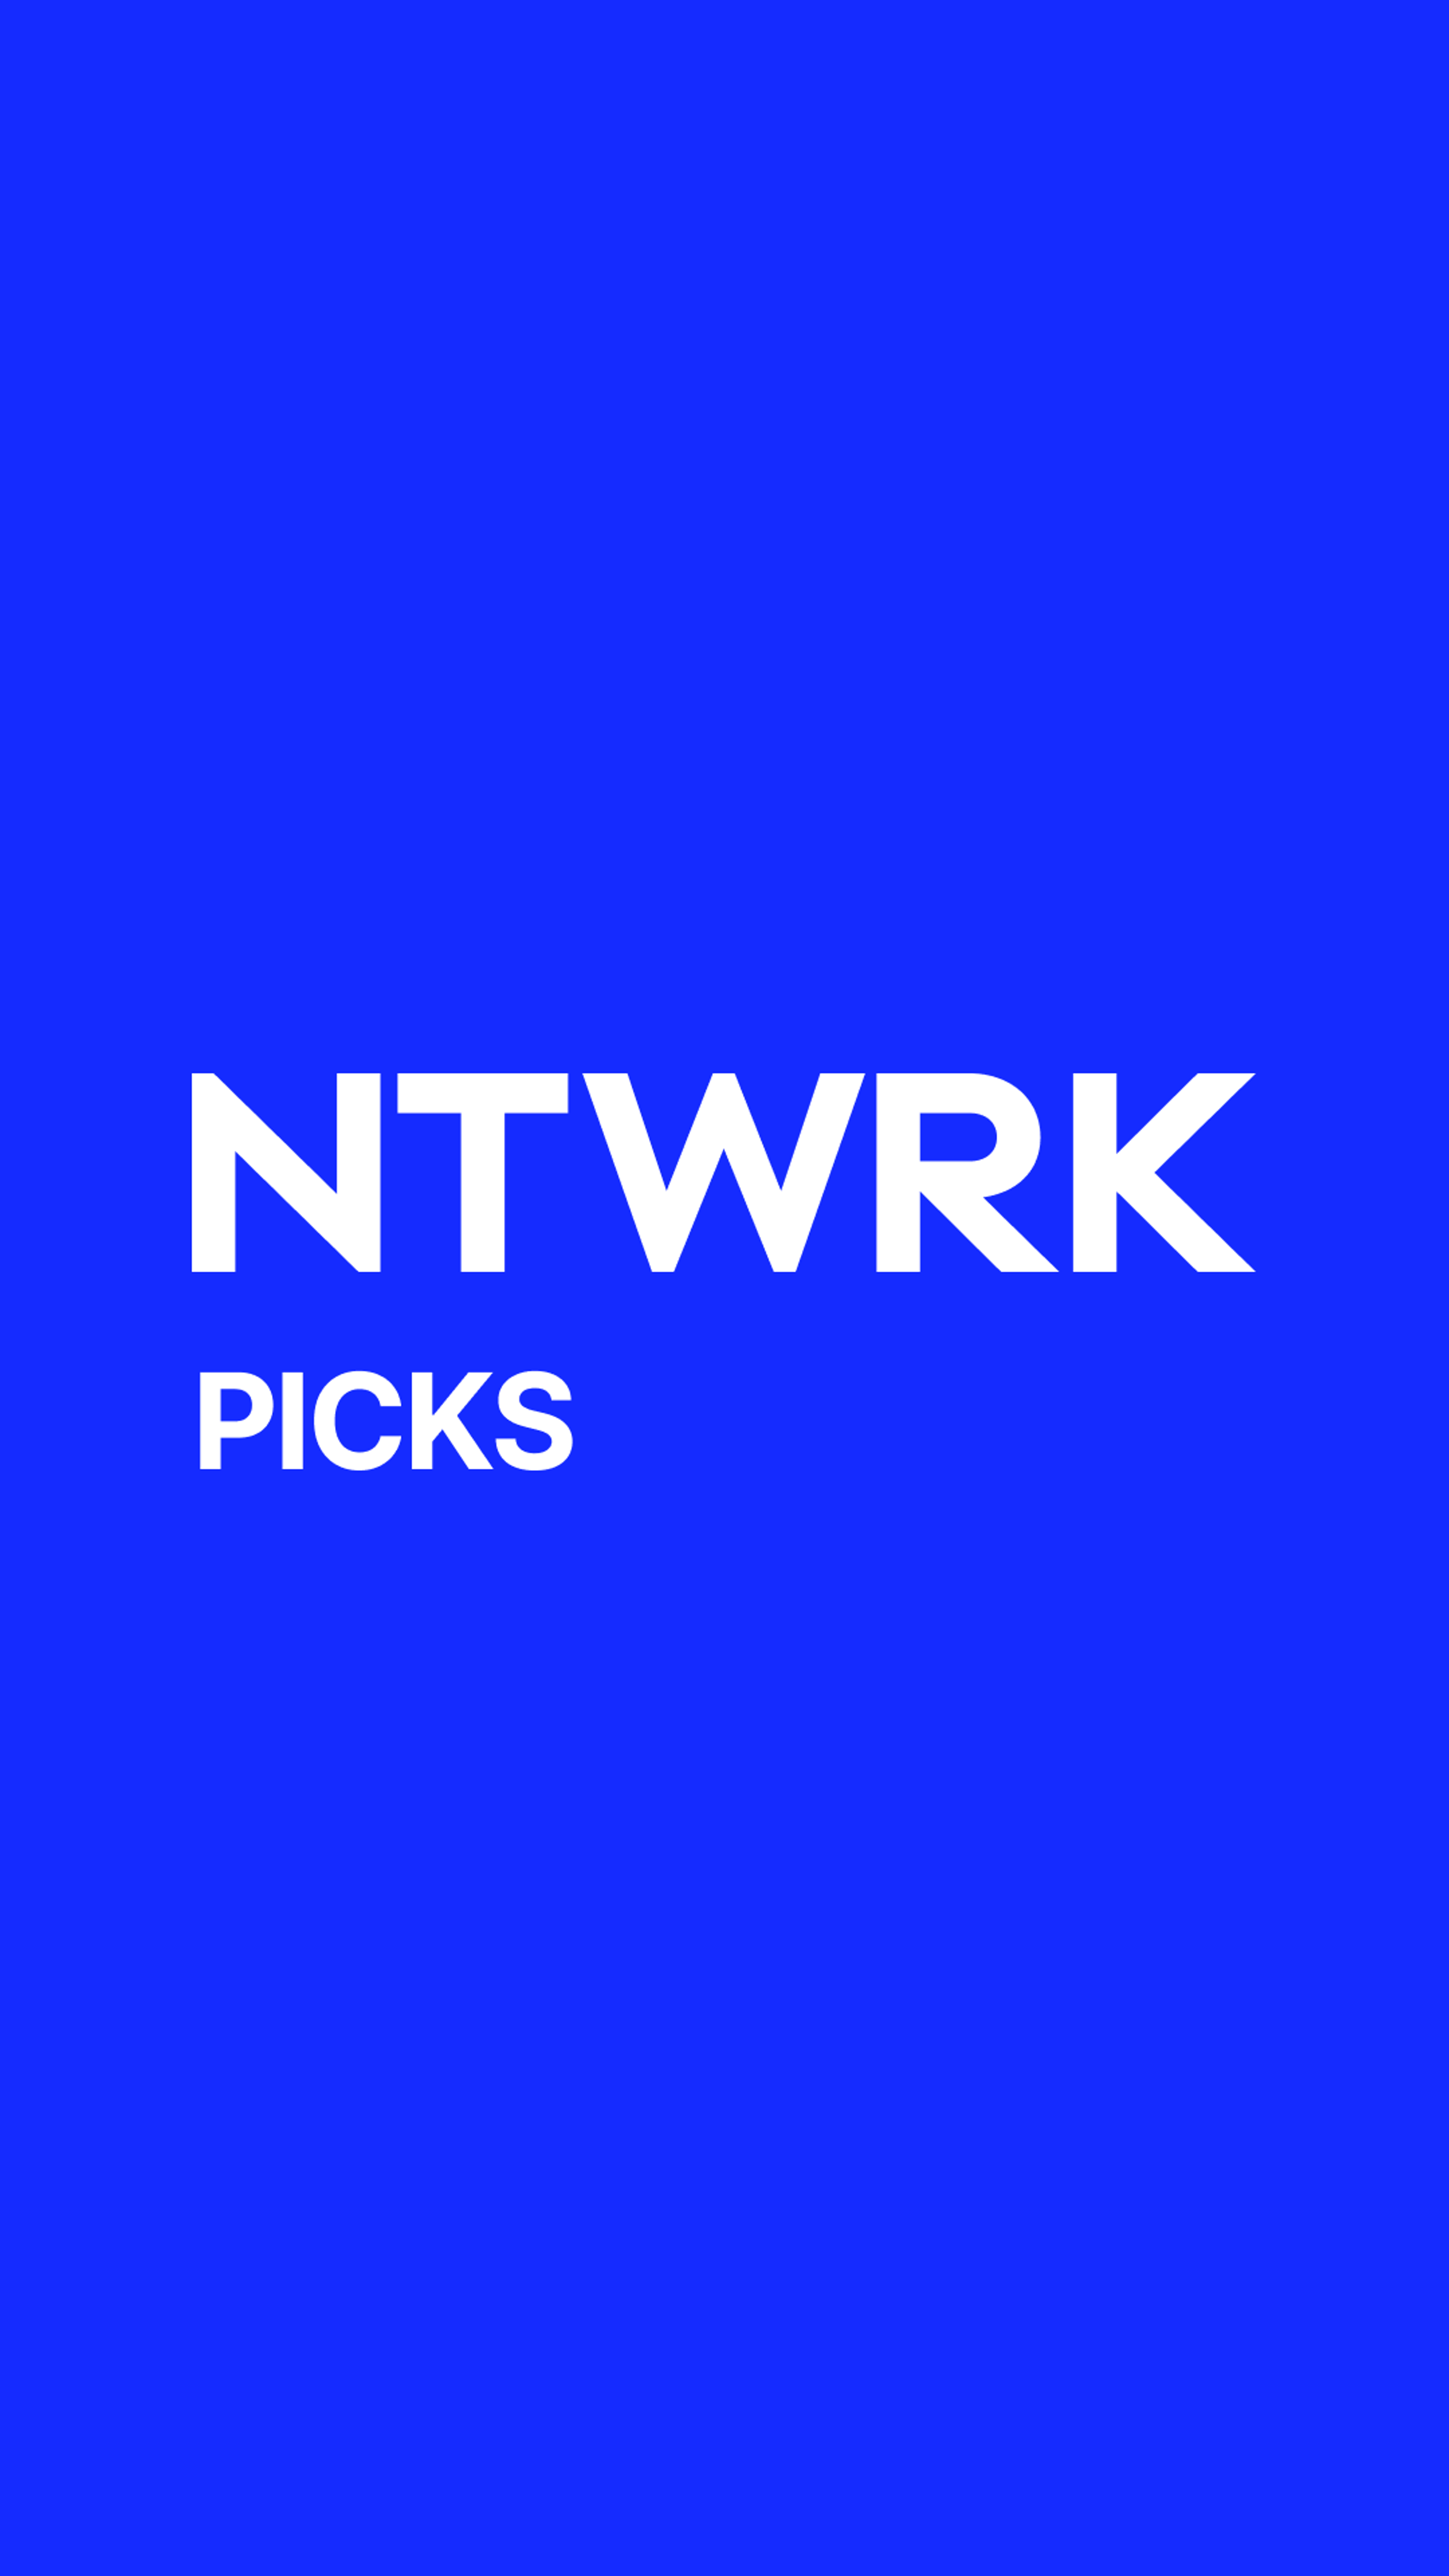 Preview image for the show titled "NTWRK Picks: Denim Tears" at Today @ 7:00 PM